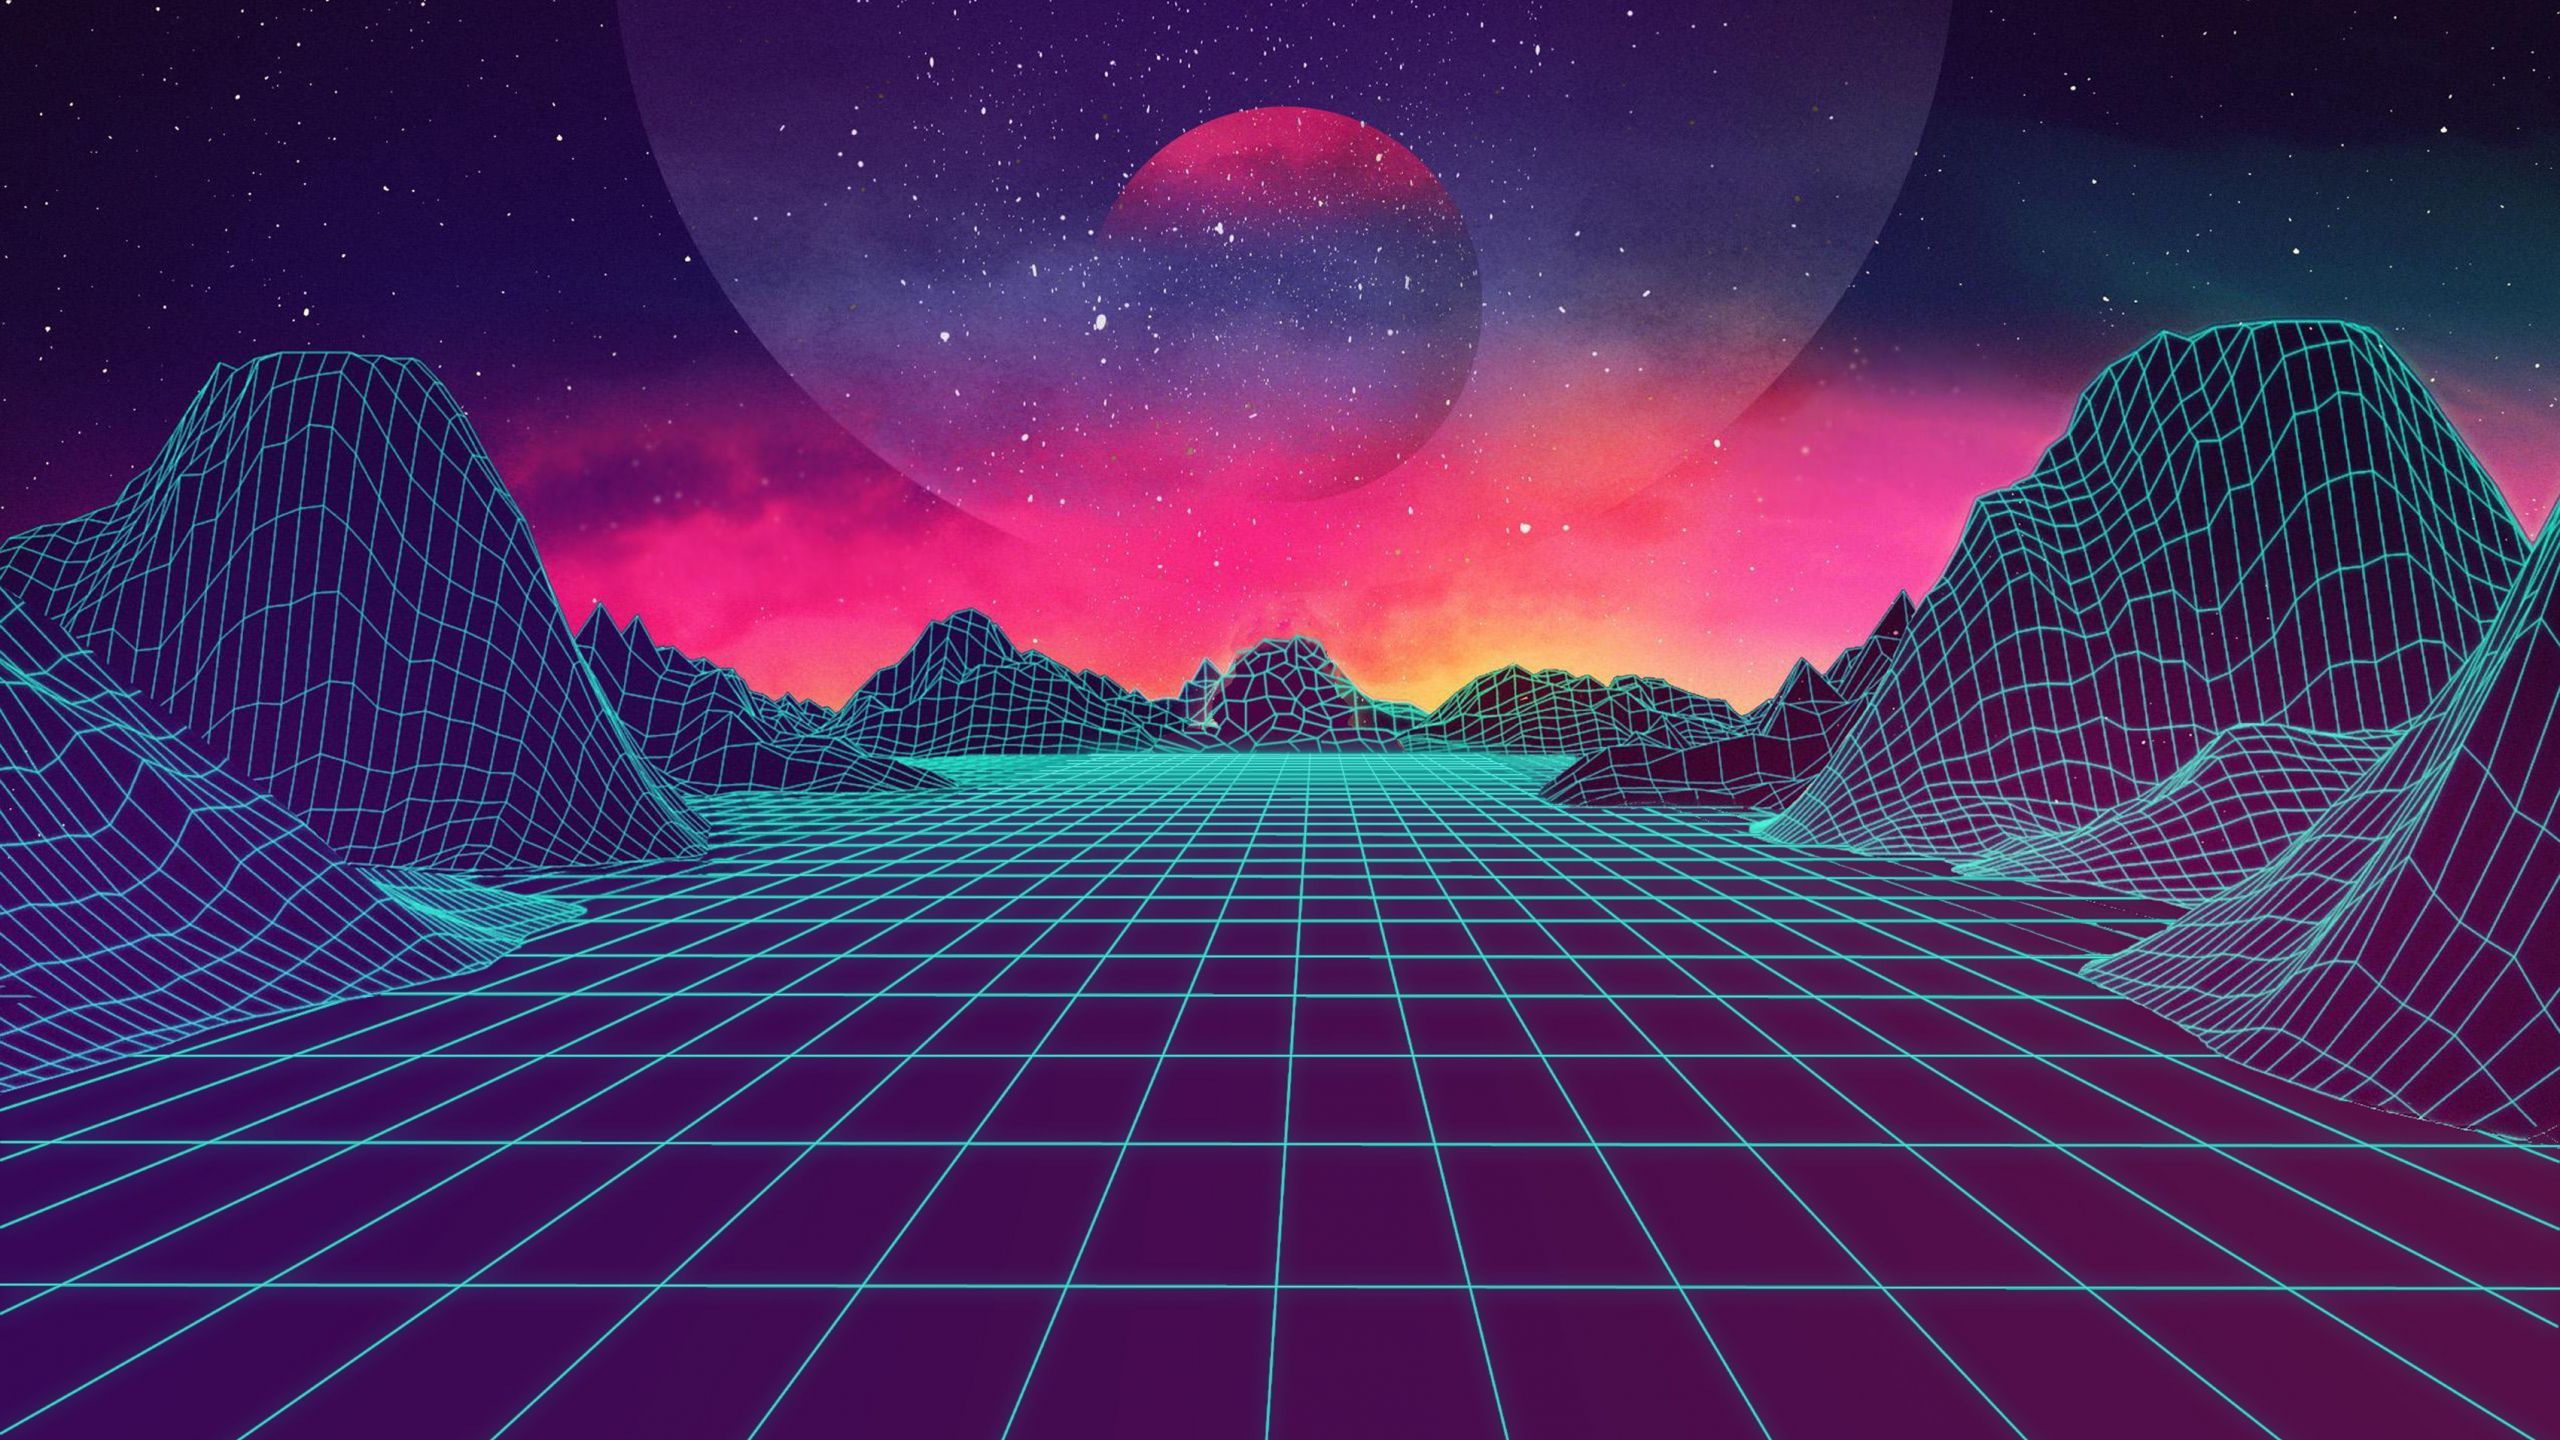 An image of a retro style landscape with mountains and stars - 2560x1440